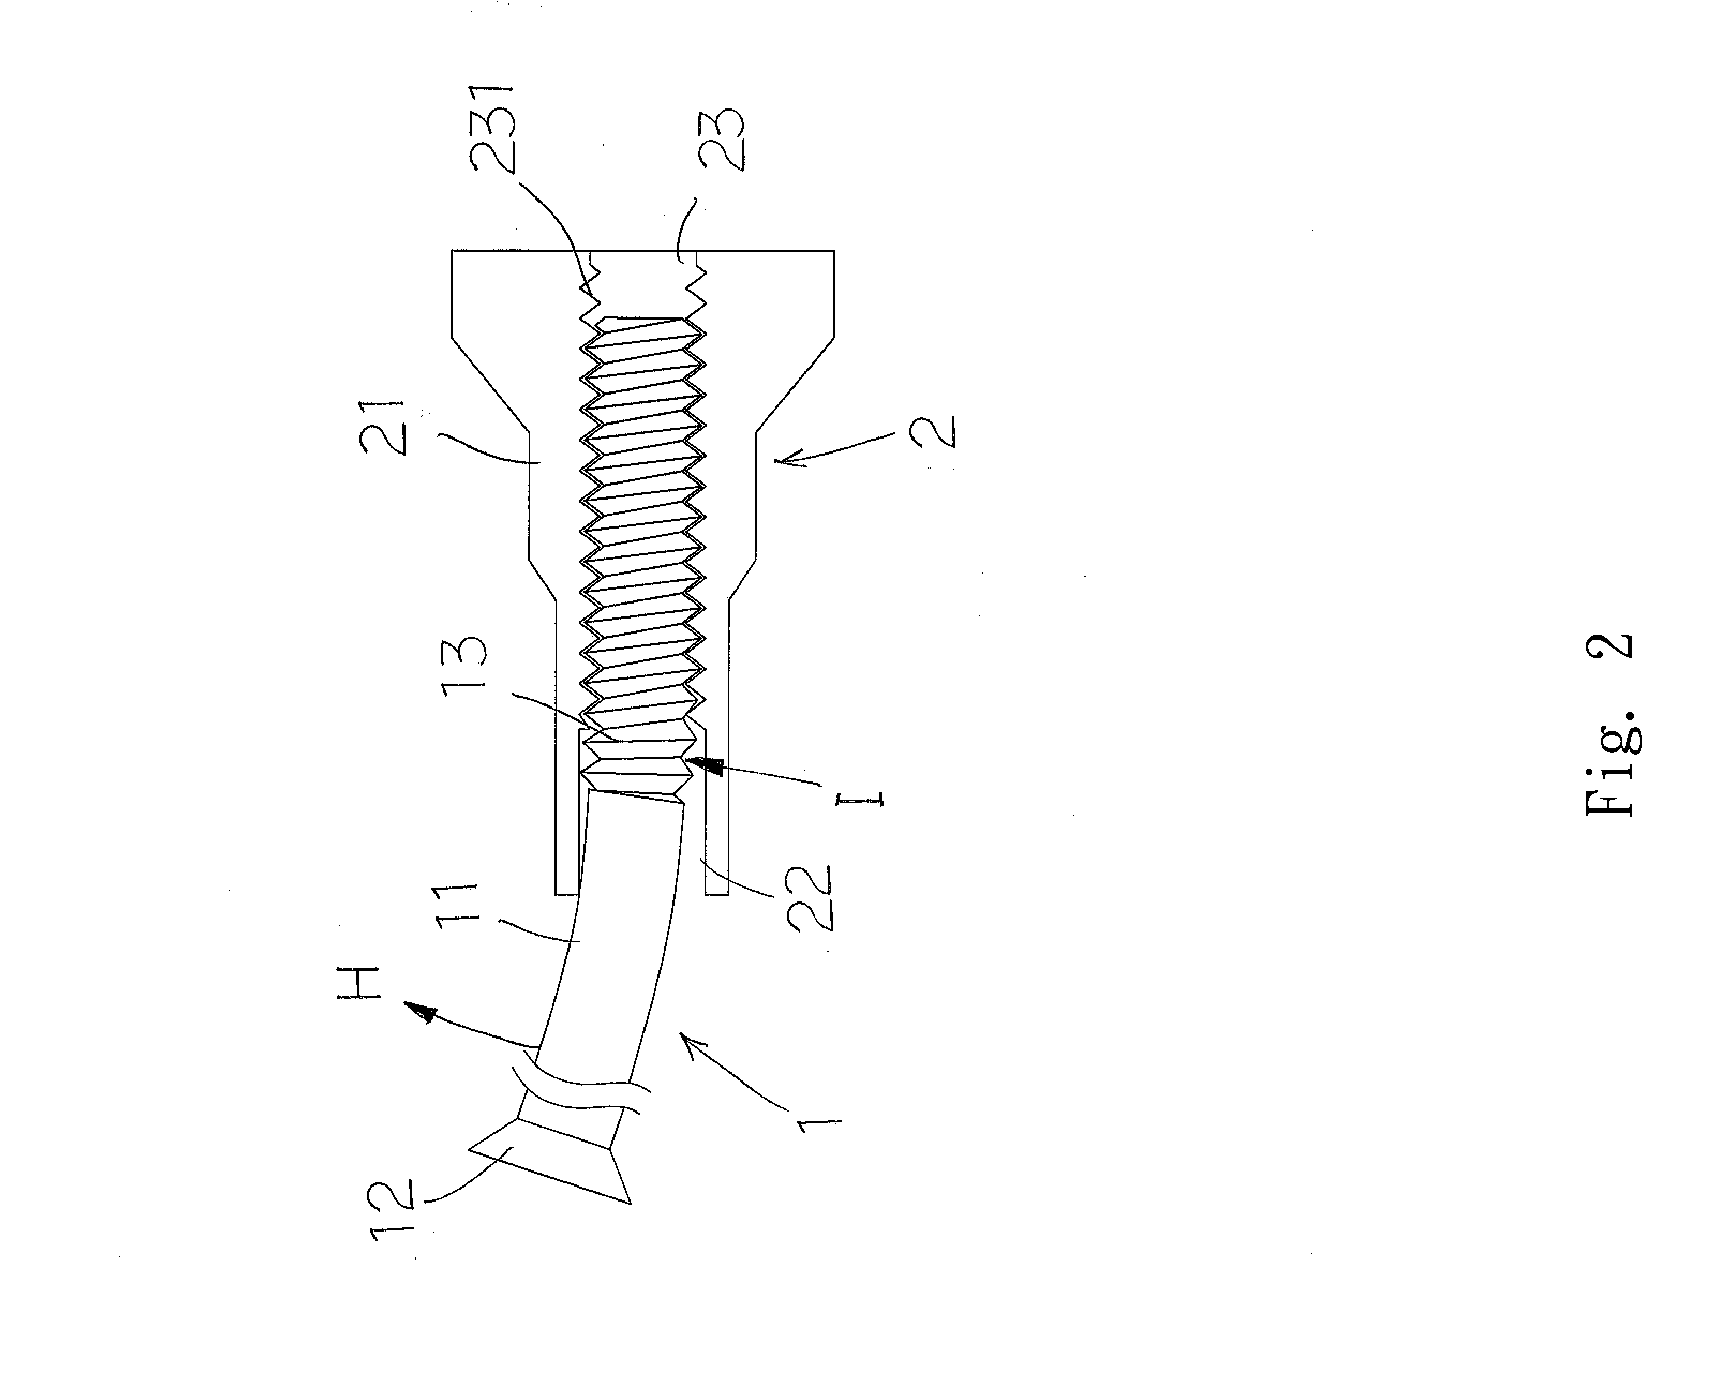 Spoke nipple structure for reducing rupture of spoke thread